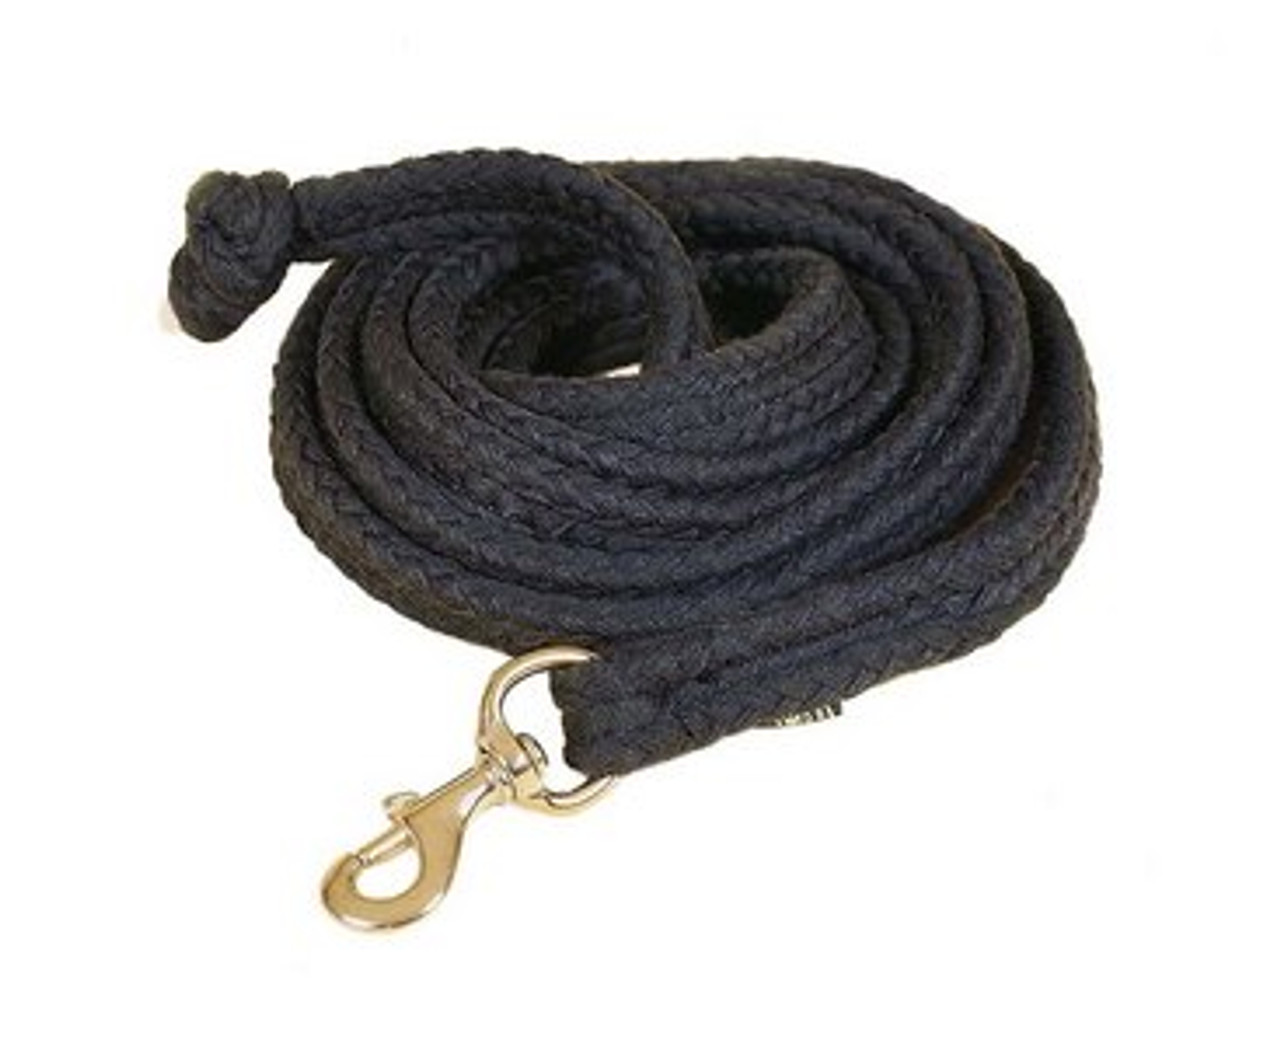 Riding Lead Rope Soft Cotton Rope Thick Rope for Crafts Horse Lead